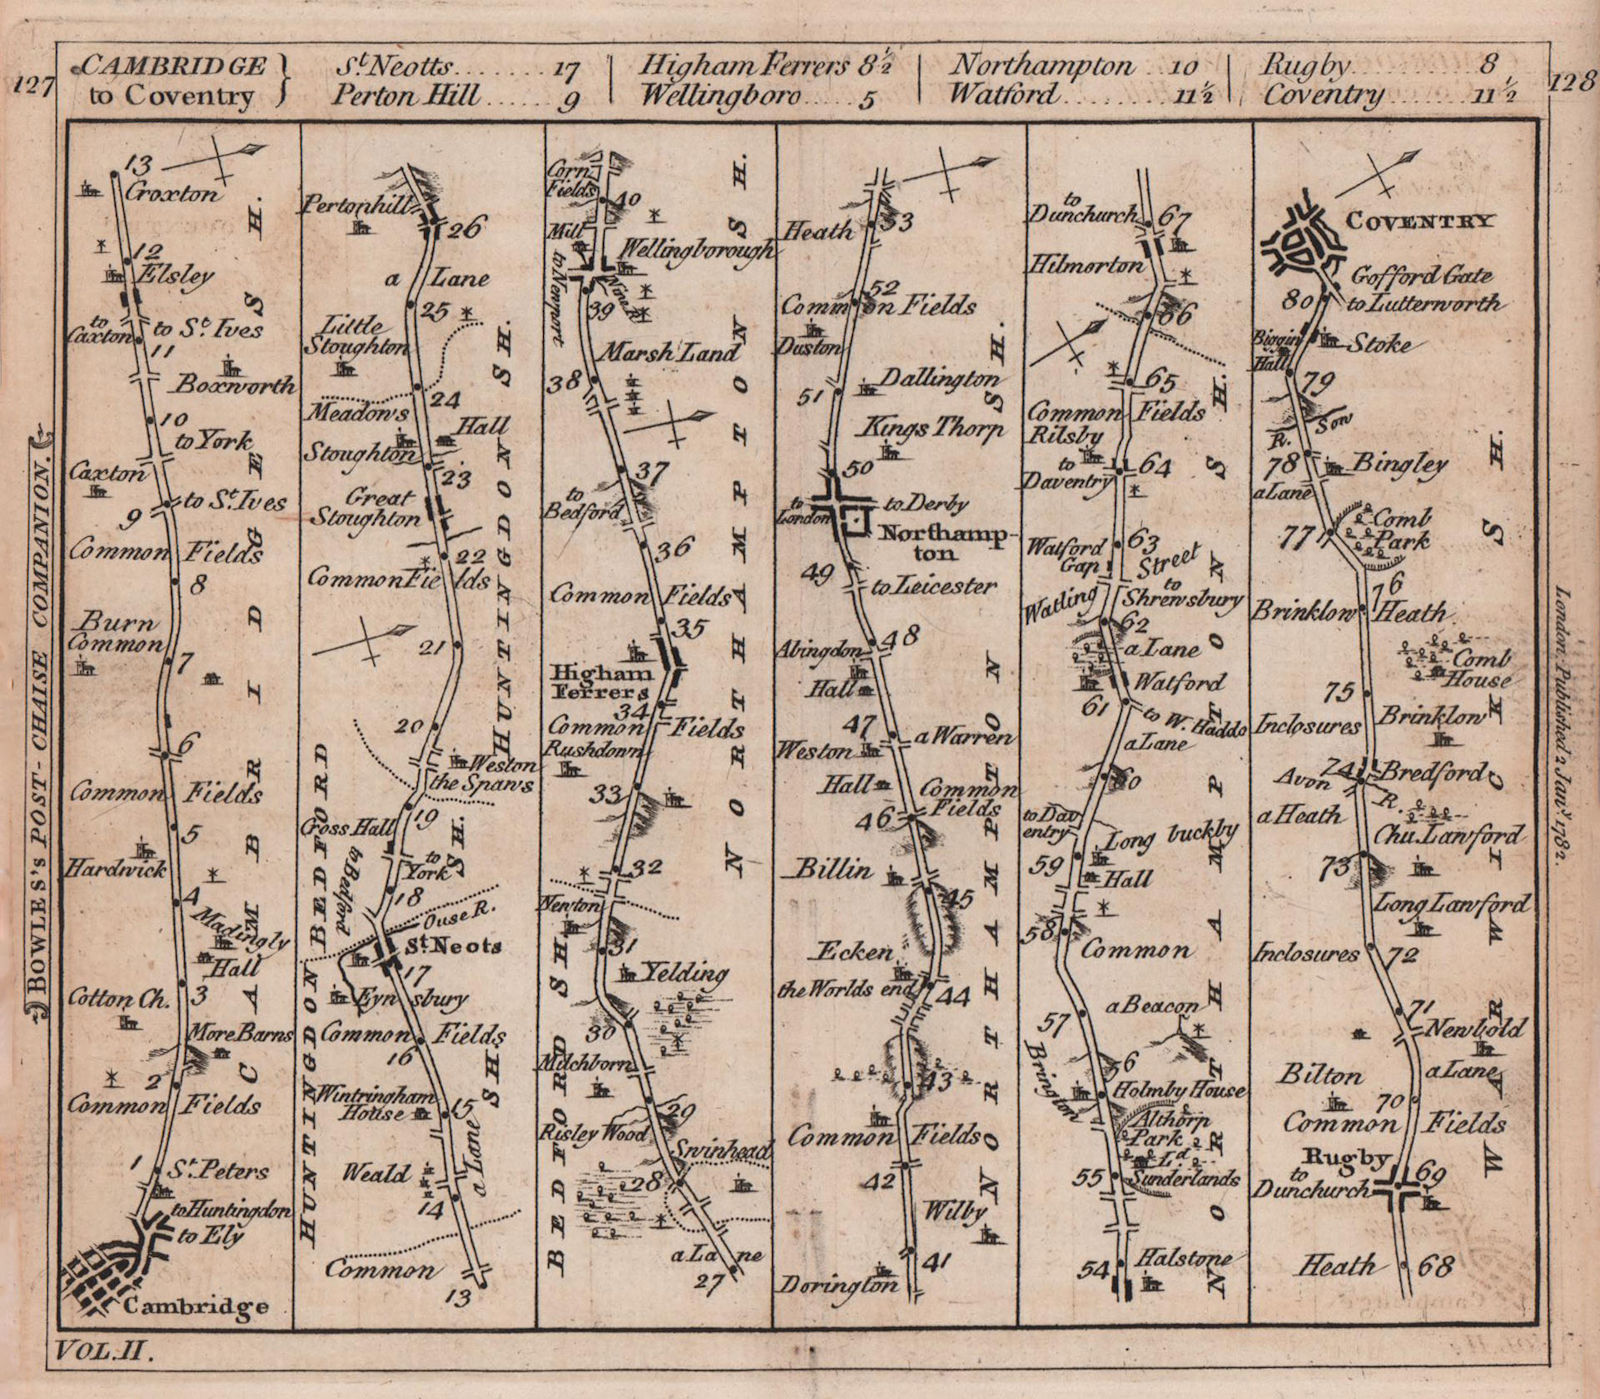 Associate Product Cambridge-St. Neots-Northampton-Rugby-Coventry road strip map. BOWLES 1782